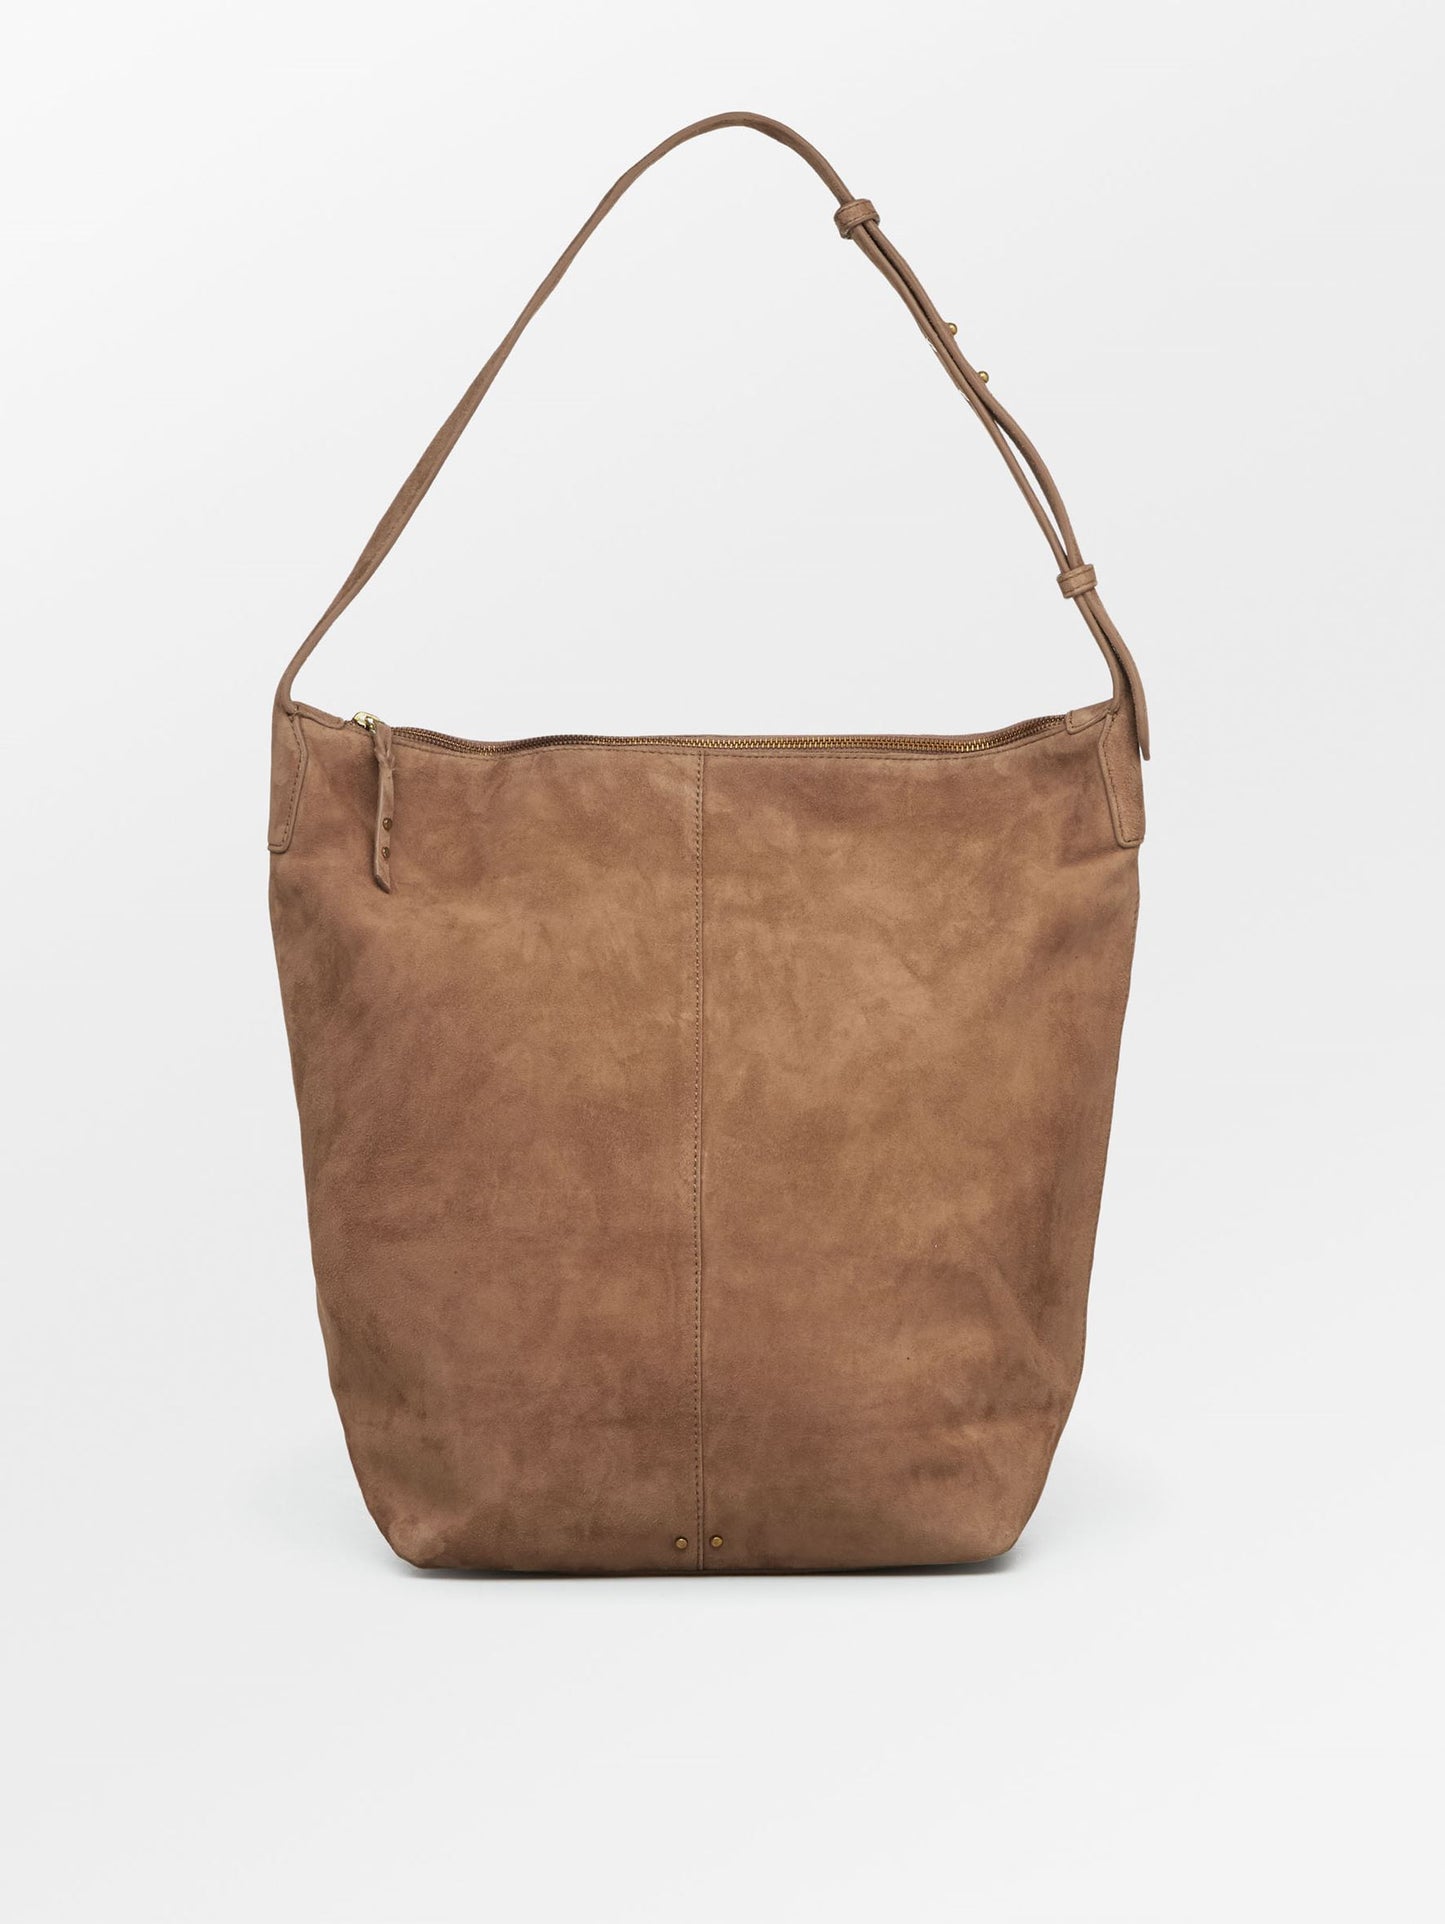 Becksöndergaard, Suede Carly Bag - Brown, archive, archive, sale, sale